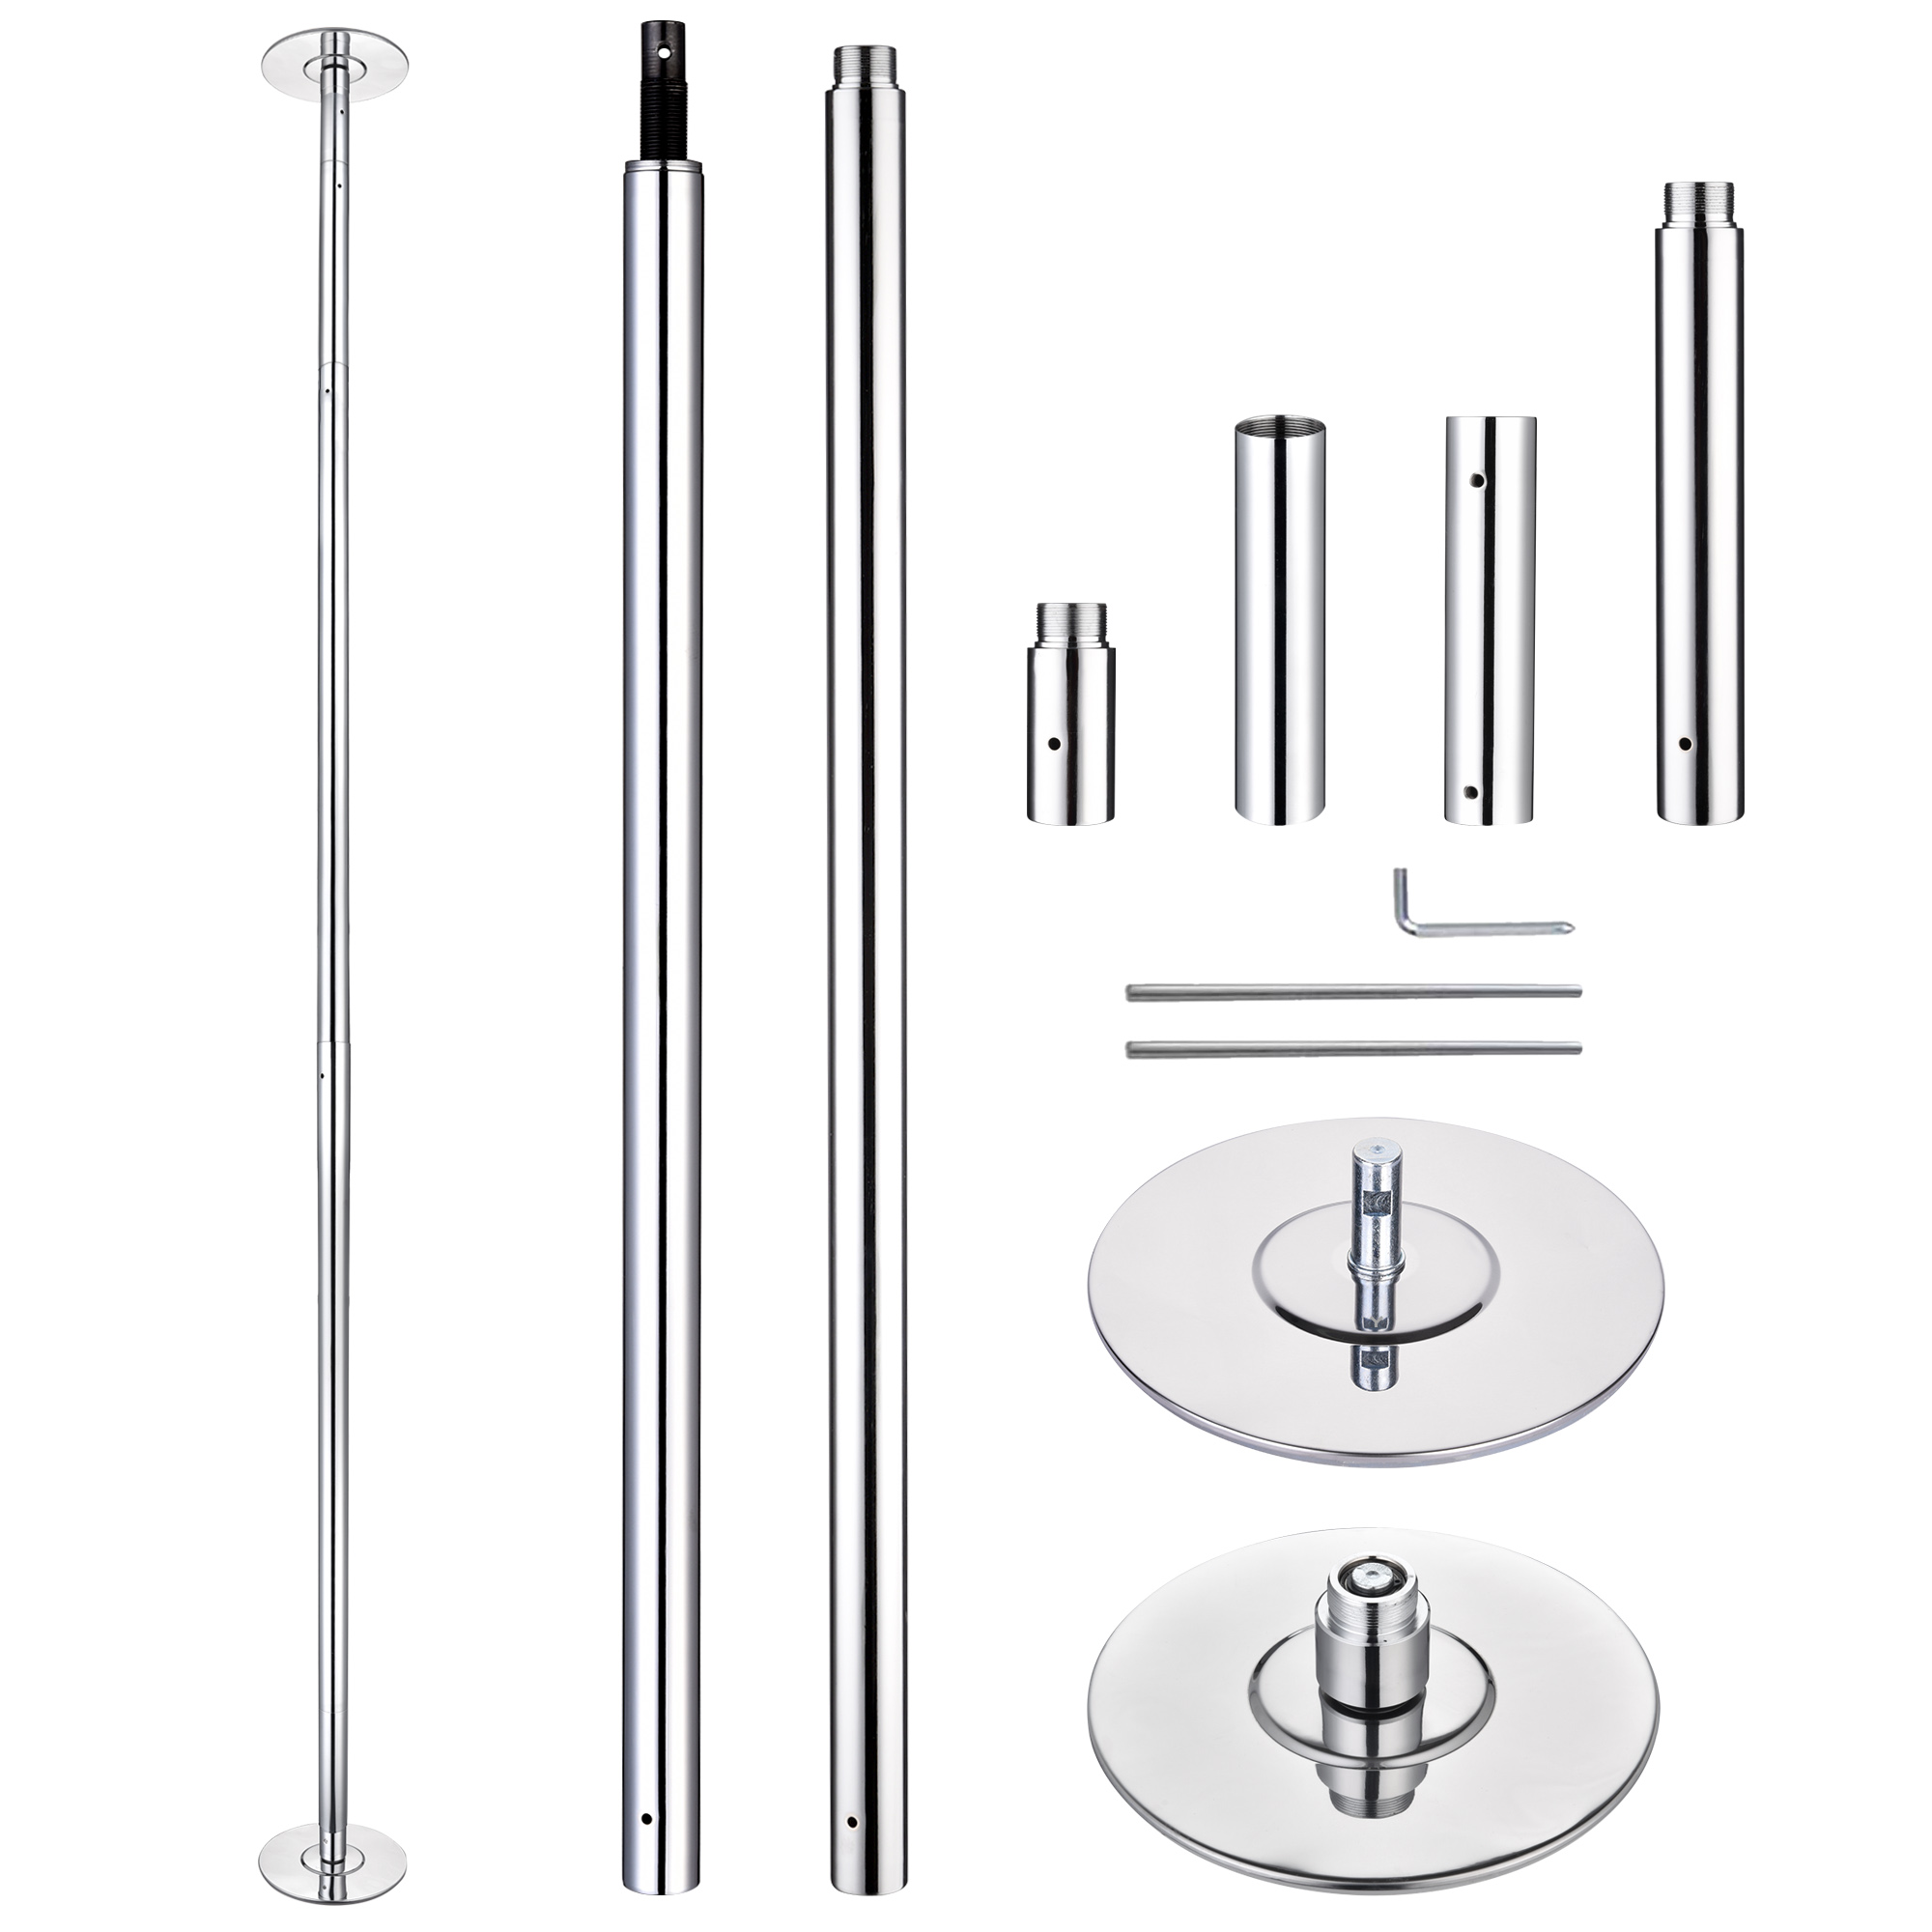 Yescom Stripper Pole 9.25 FT Dancing Pole 45mm Dance Pole Kit Static Spinning for Party Club Fitness Silver, Max Load 1102 Lbs - image 2 of 11